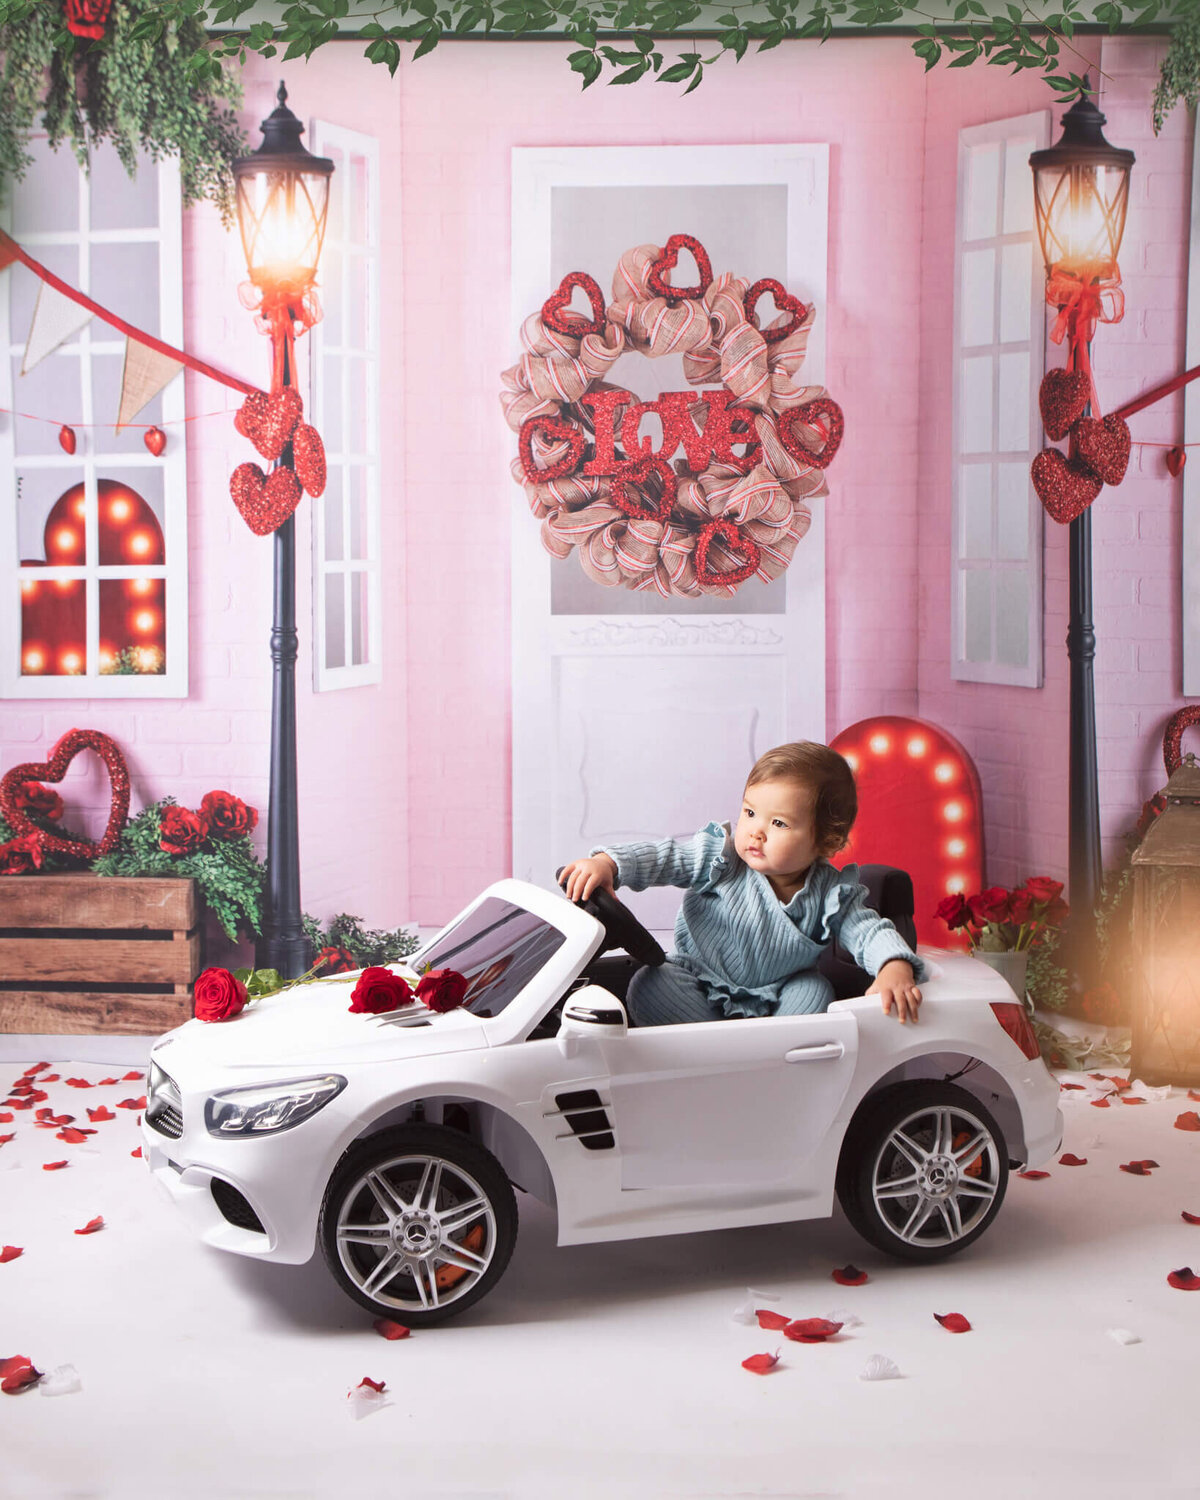 Valentines Day photoshoot with baby girl sitting in a baby car